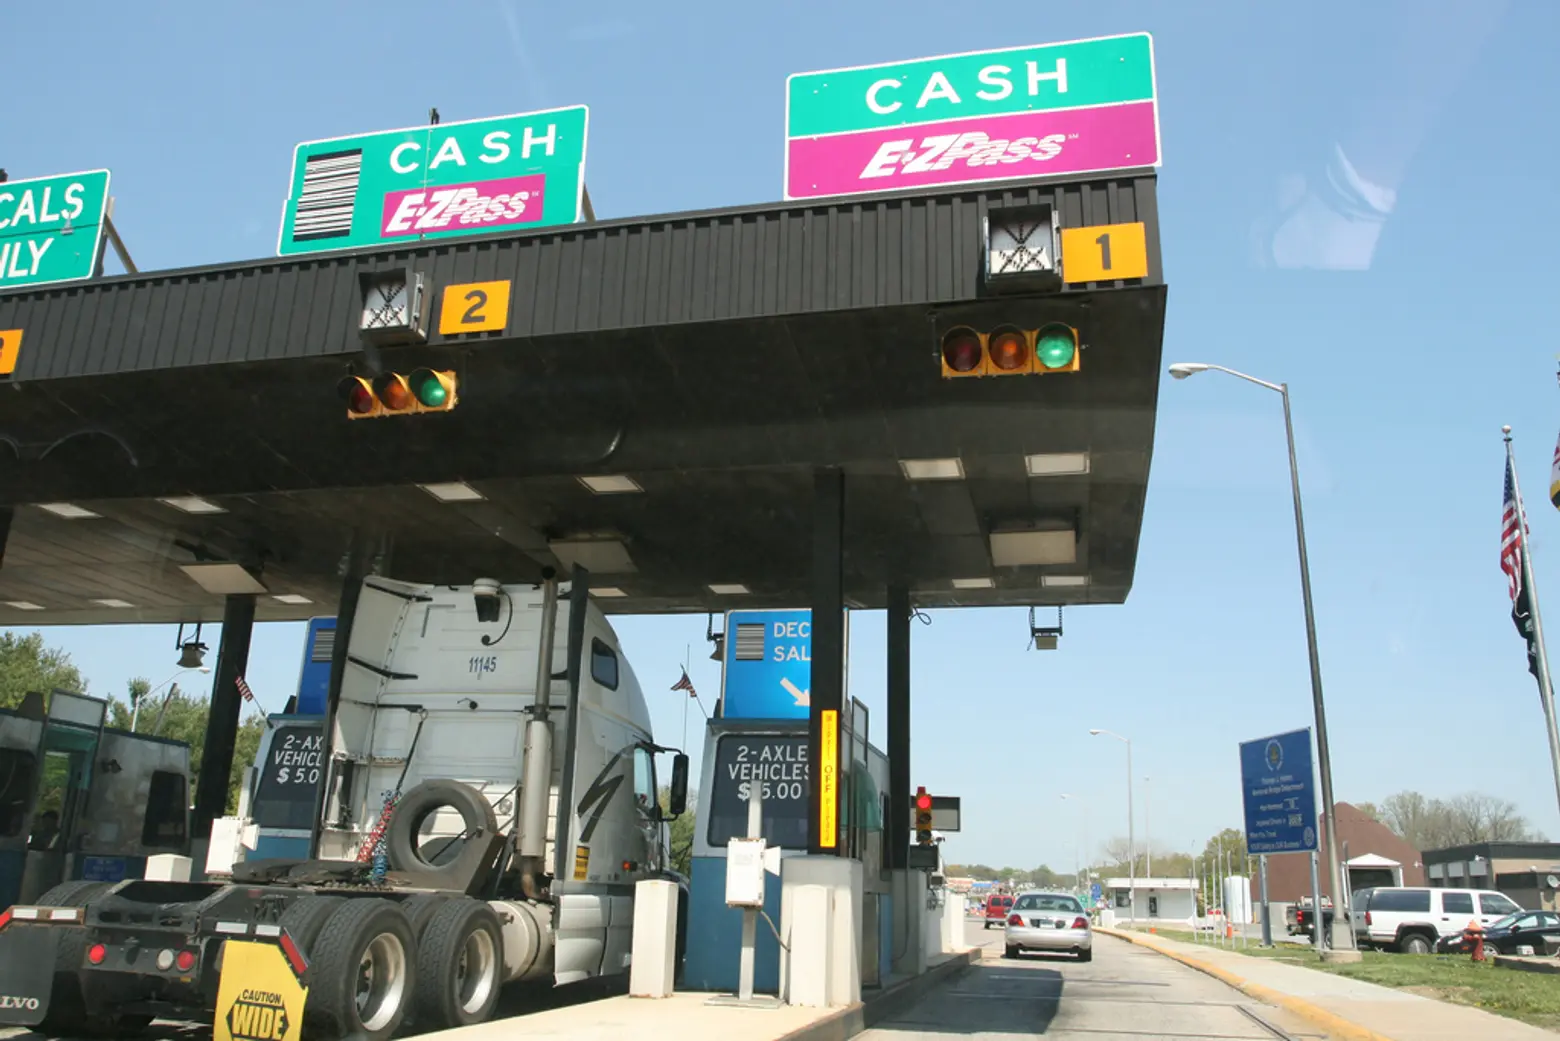 A Brief History of E-ZPass; What You Need to Make Your Own Iced Coffee